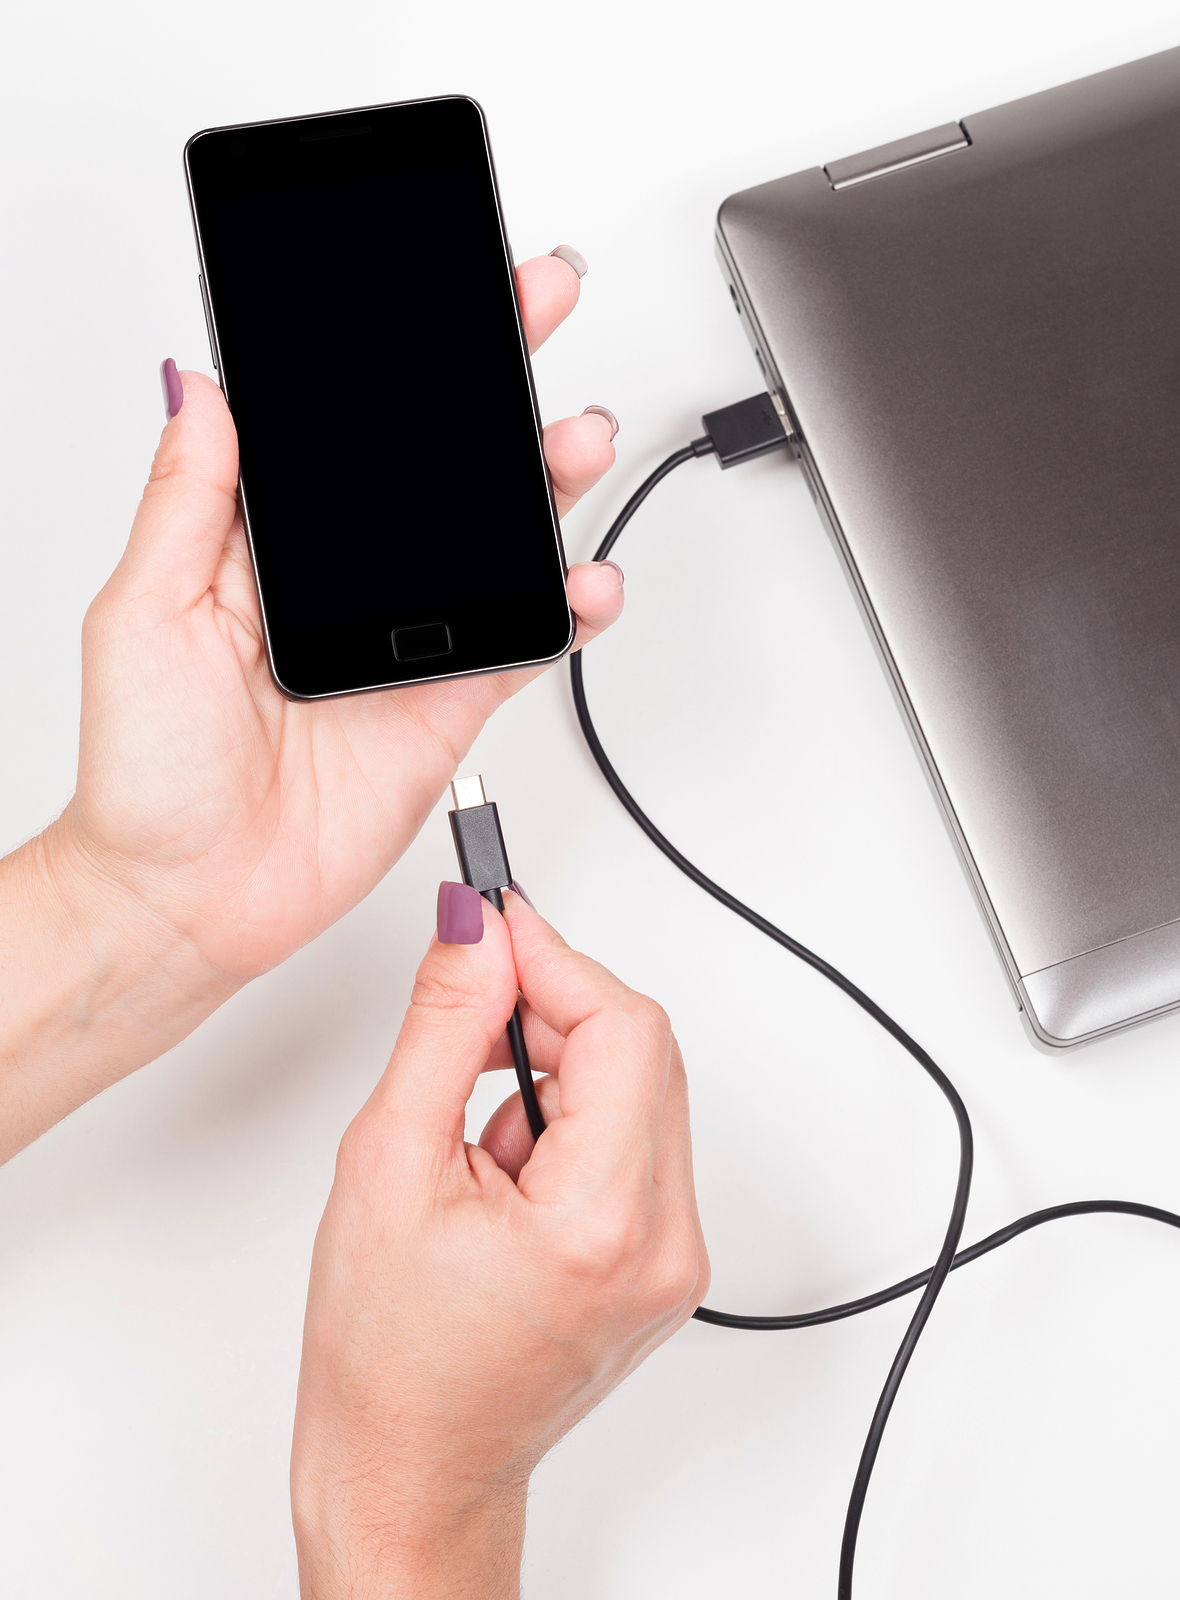 portable battery charger Woman Connecting Smartphone To A Notebook For Powering